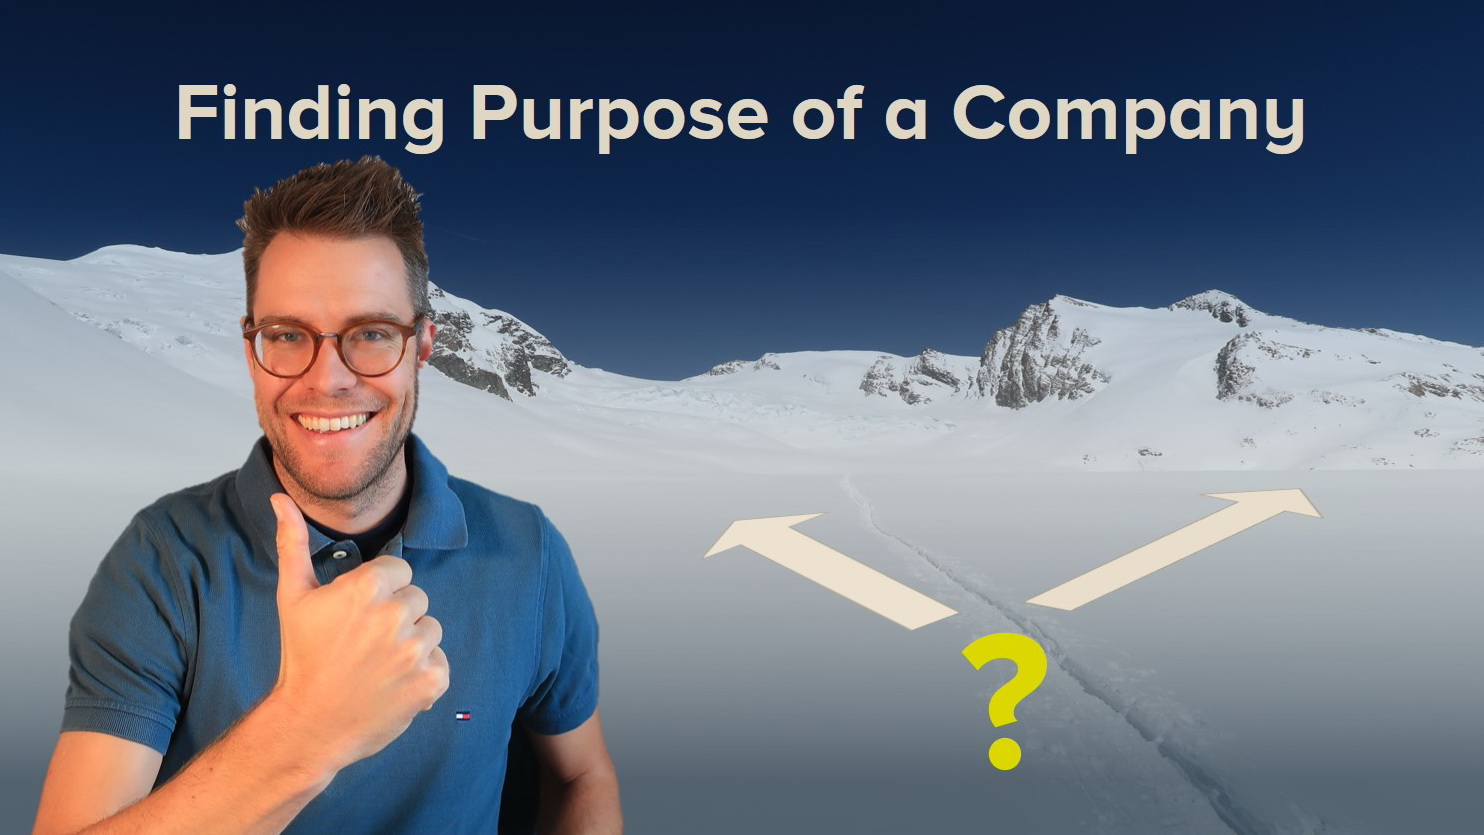 Finding purpose of a company